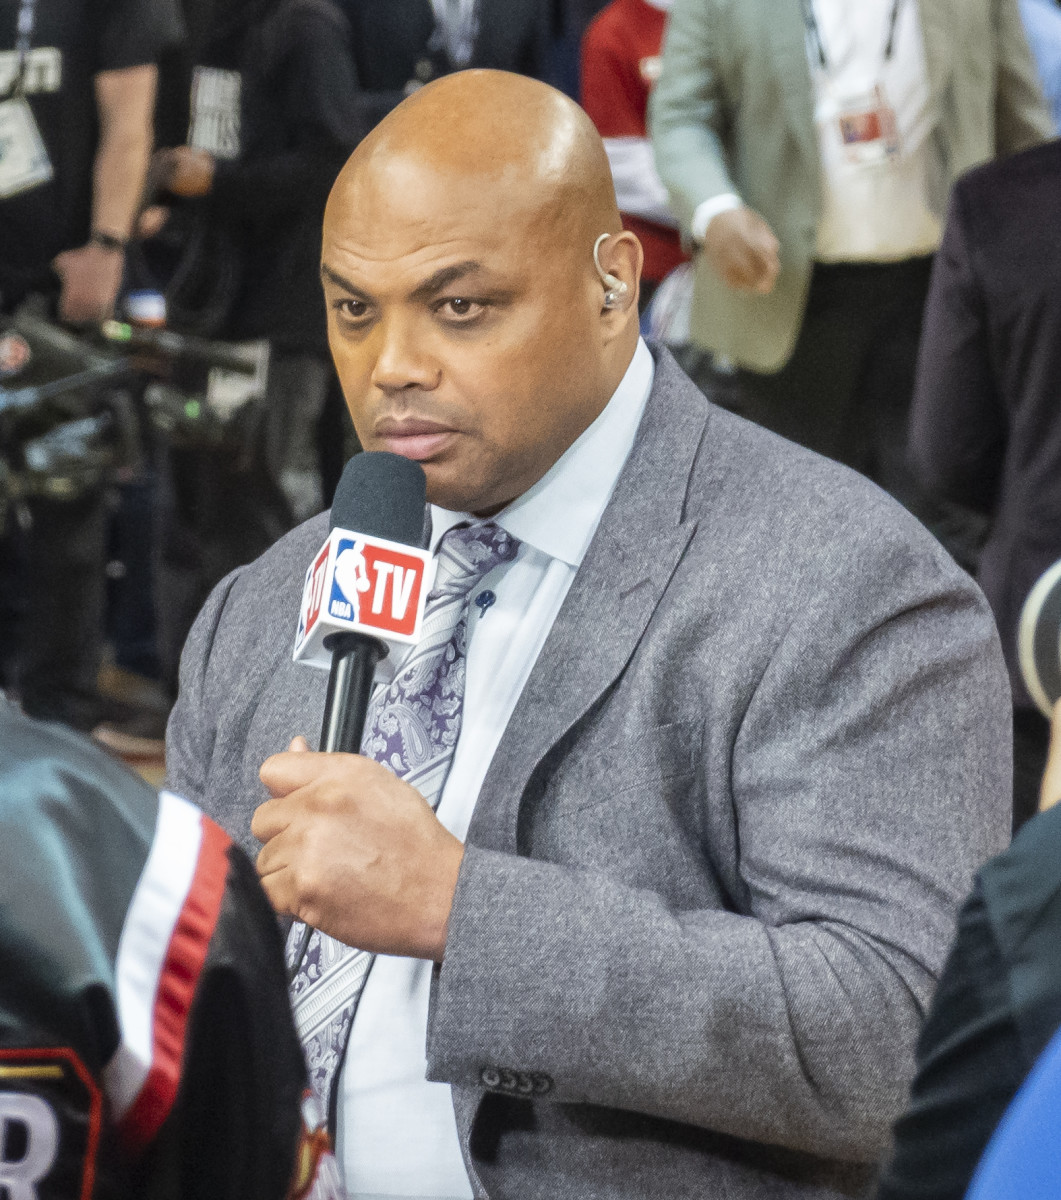 Charles Barkley courtside during a game.